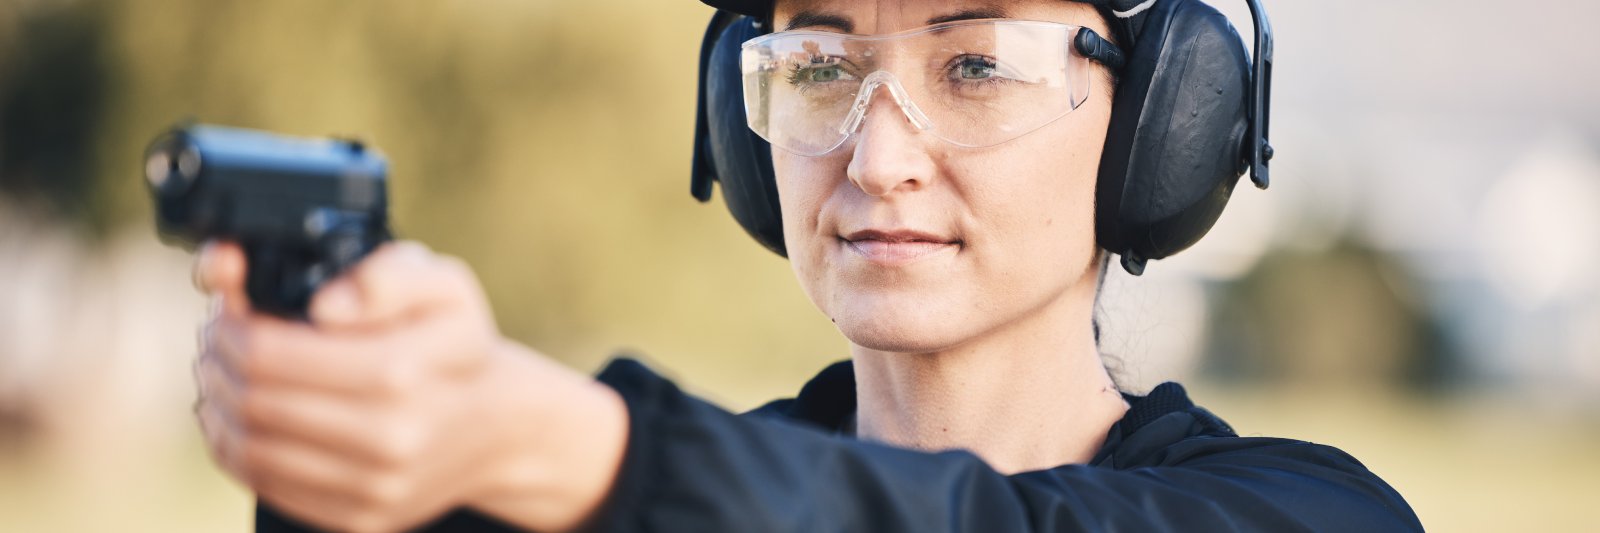 Empowered and Armed: The Rise of Female Gun Ownership